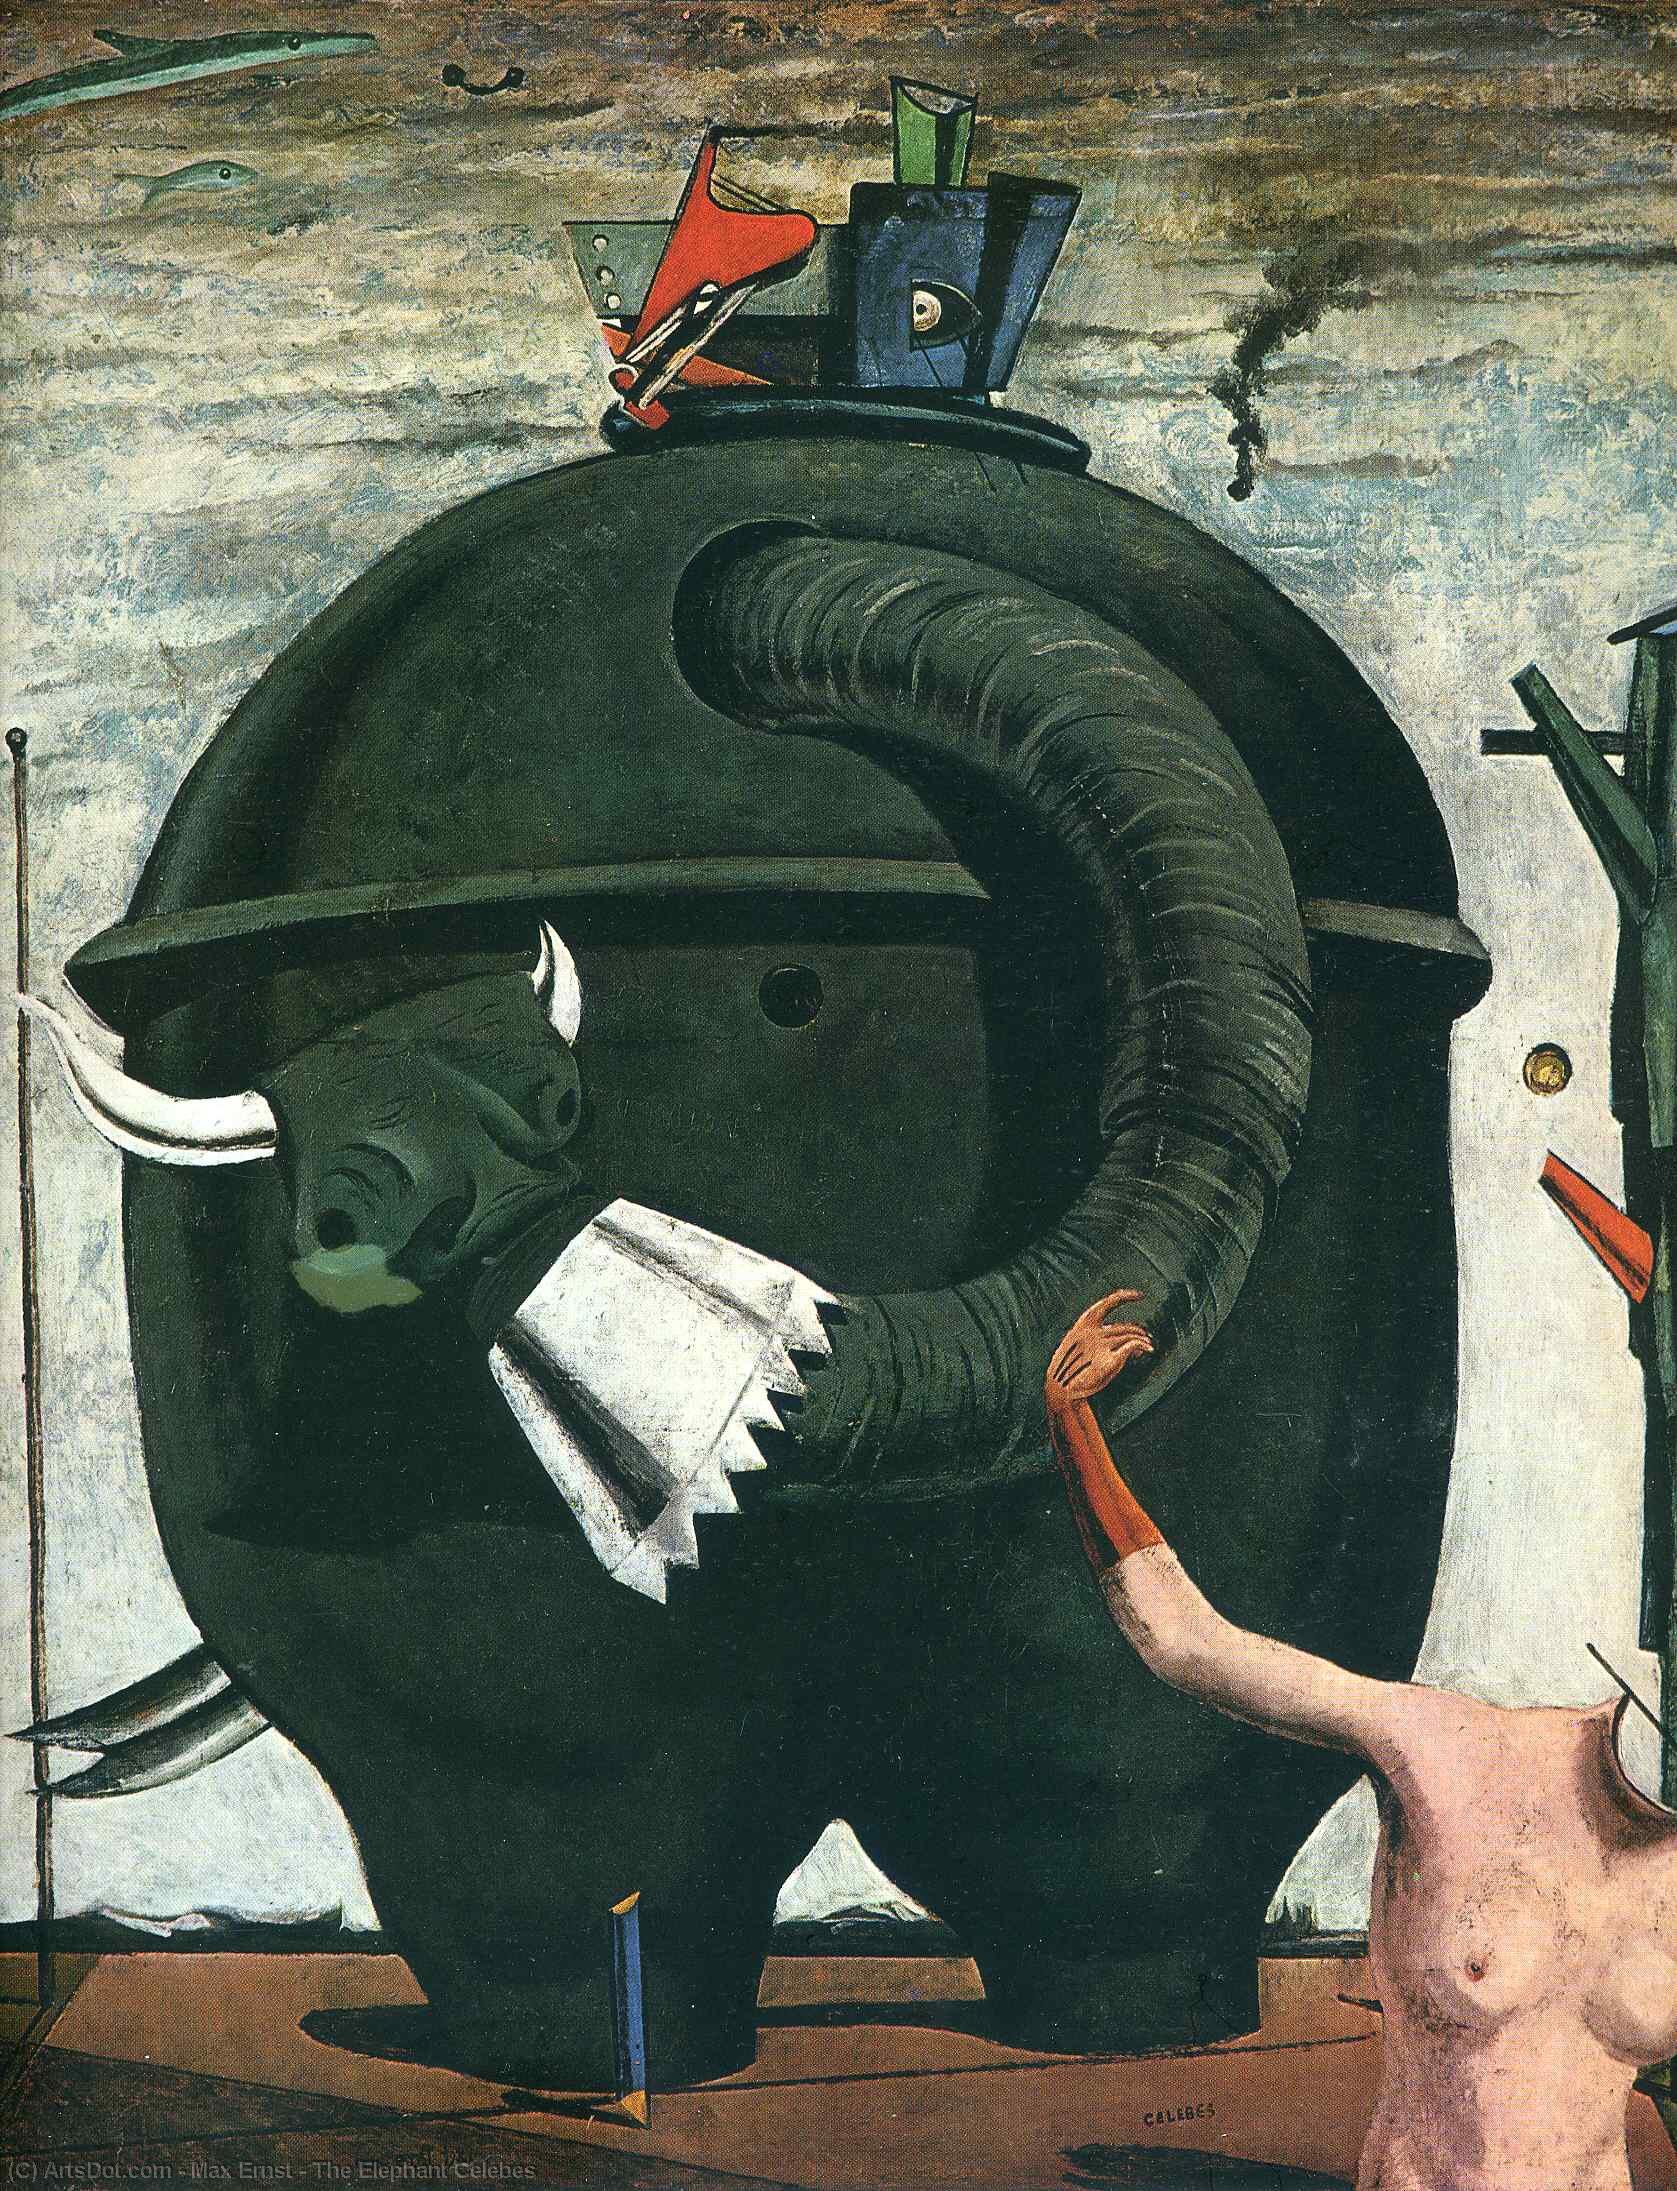  Art Reproductions The Elephant Celebes, 1921 by Max Ernst (Inspired By) (1891-1976, Germany) | ArtsDot.com